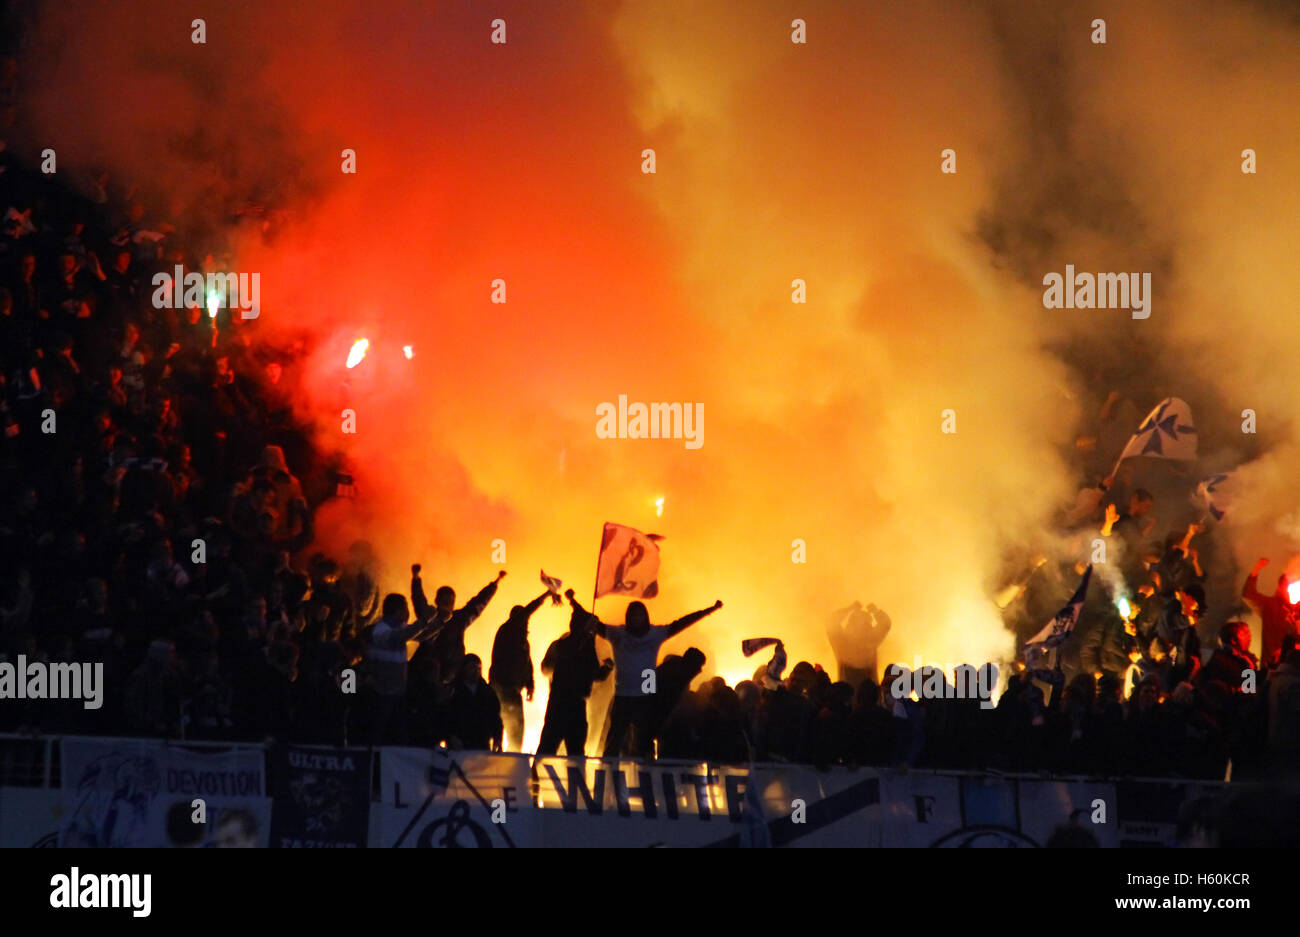 FC Dynamo Kyiv supporters burn flares during the game against FC Metalist Kharkiv (Ukraine Championship) in Kyiv Stock Photo